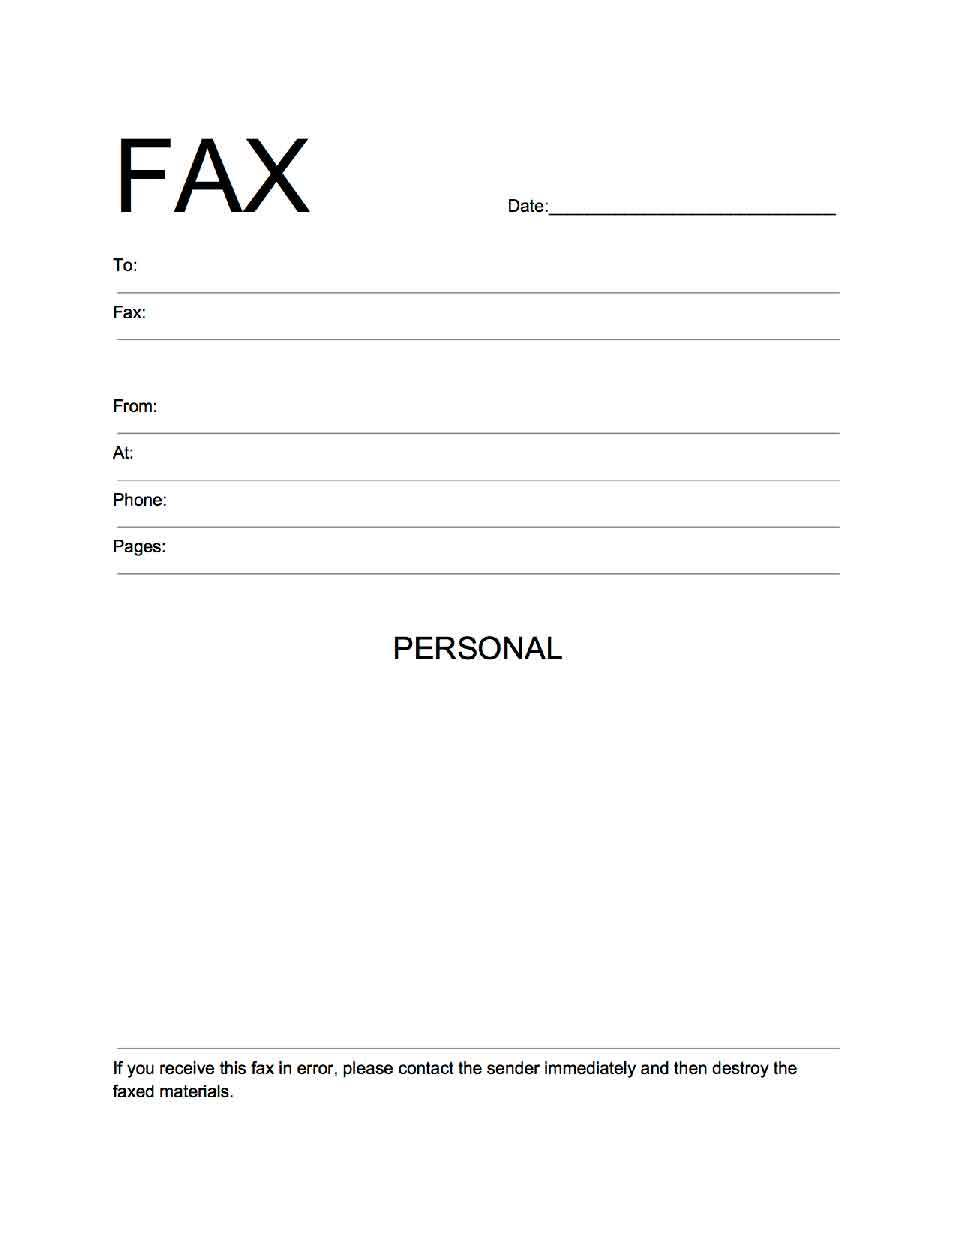 Fax Cover Sheet Pdf | Peanuts Gallery Bend - Free Printable Fax Cover Sheet Pdf